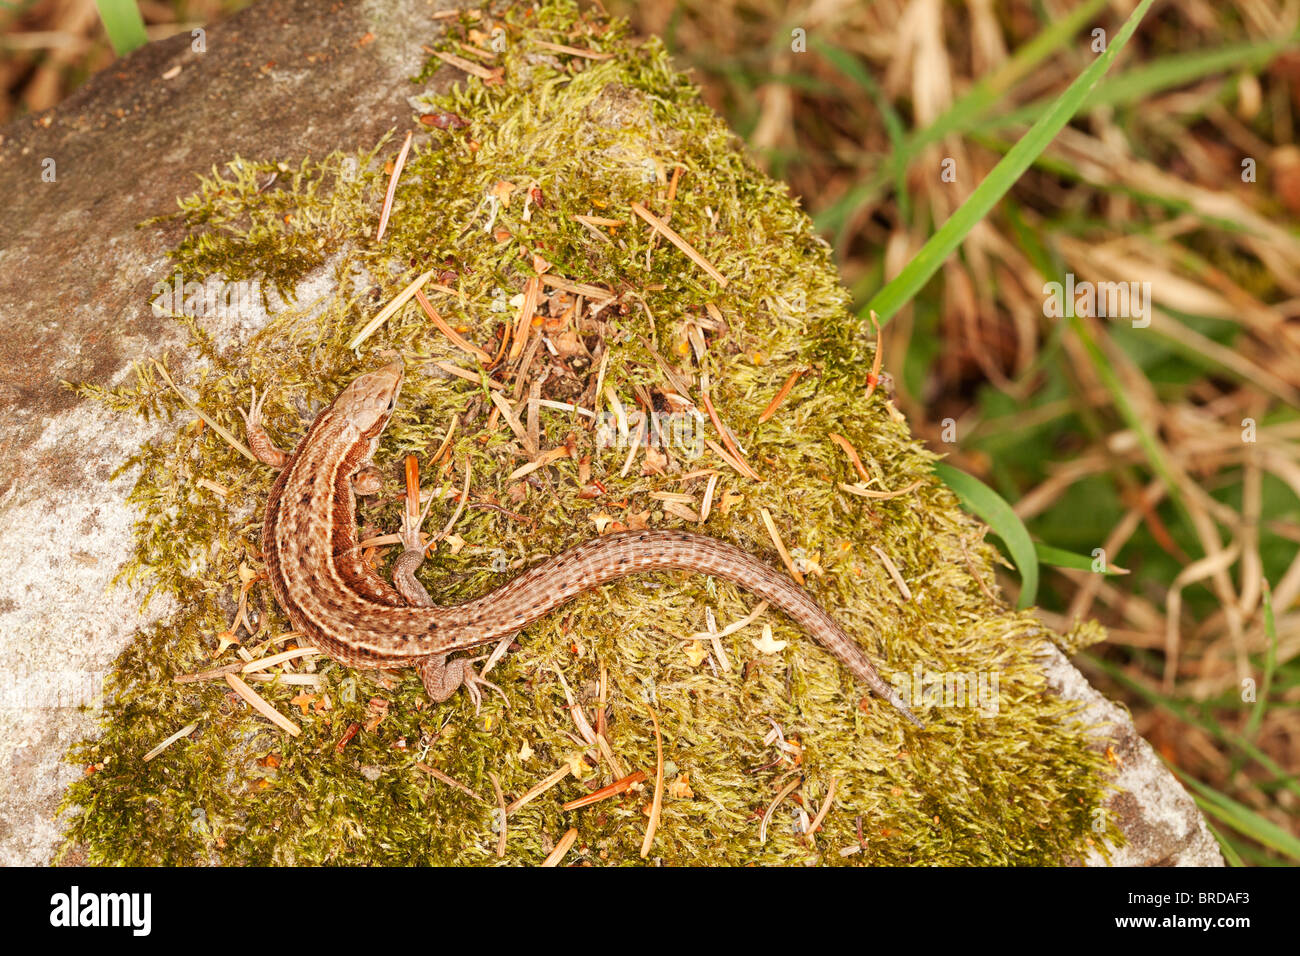 Female common lizard on a moss covered rock. Stock Photo